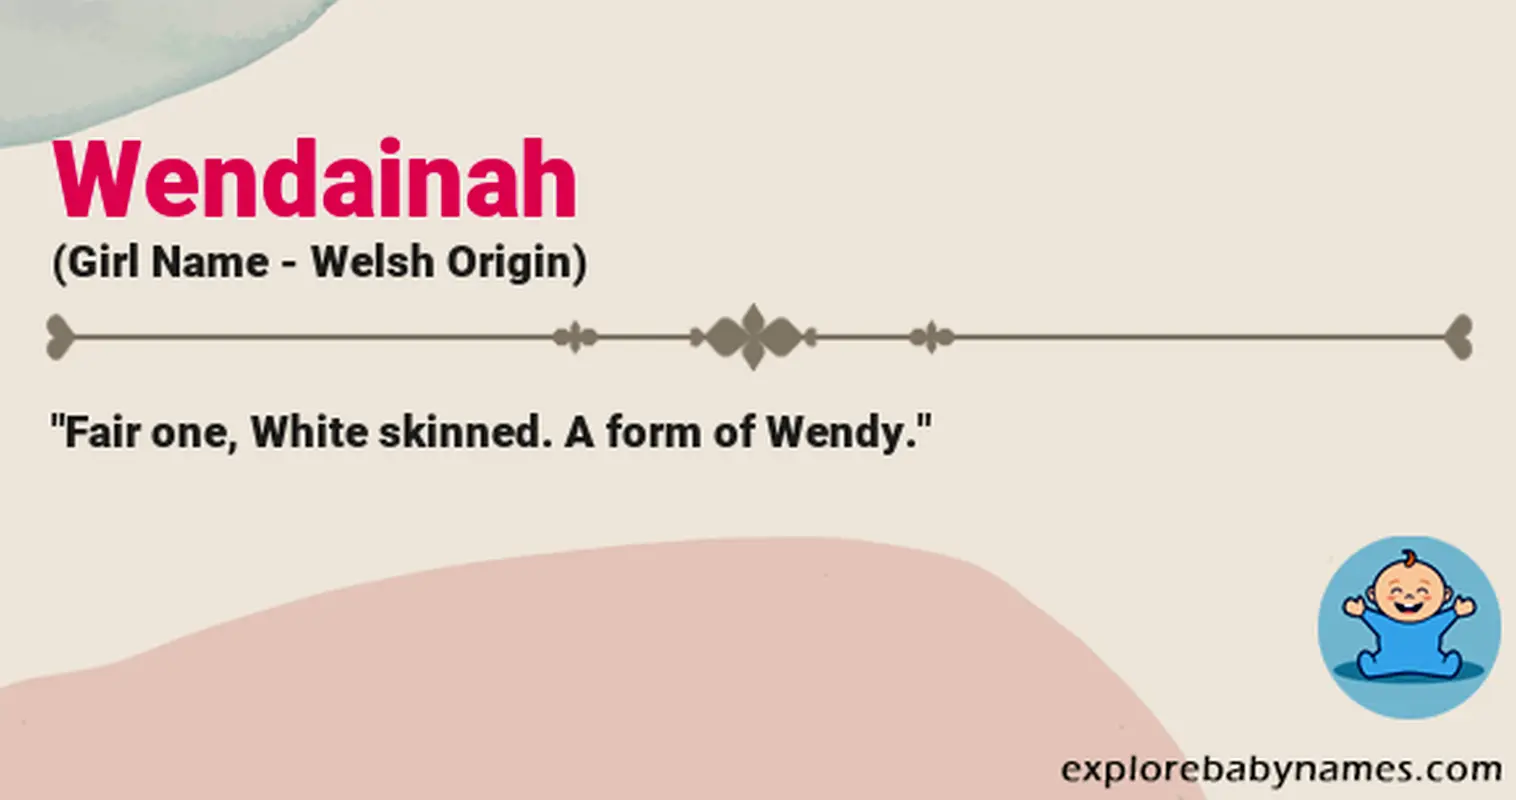 Meaning of Wendainah